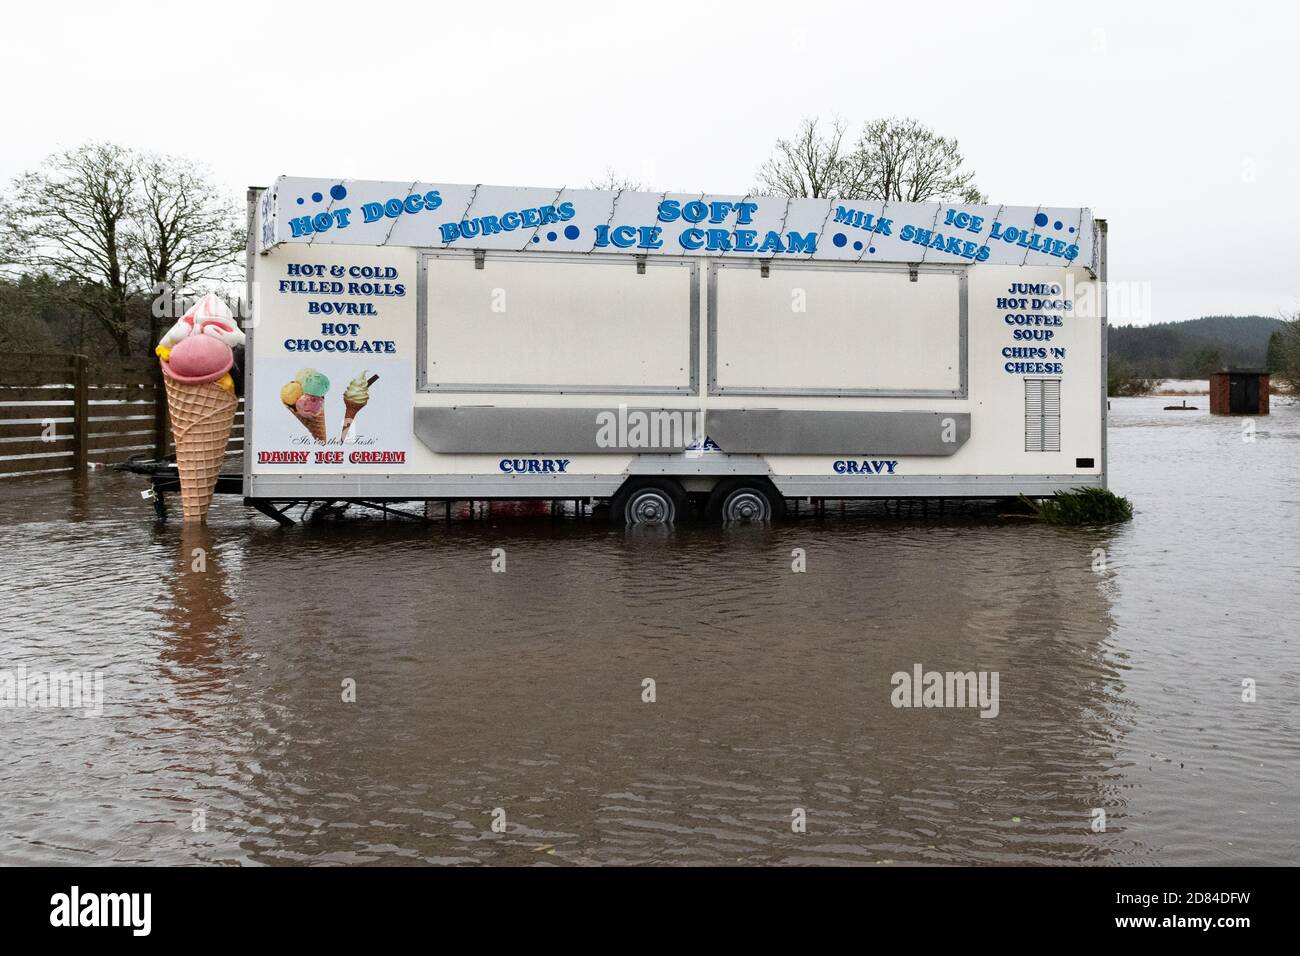 Catering trailer with ice cream sign standing in flooded car park - Aberfoyle, Stirlingshire, Scotland, UK - 10 December 2019 Stock Photo